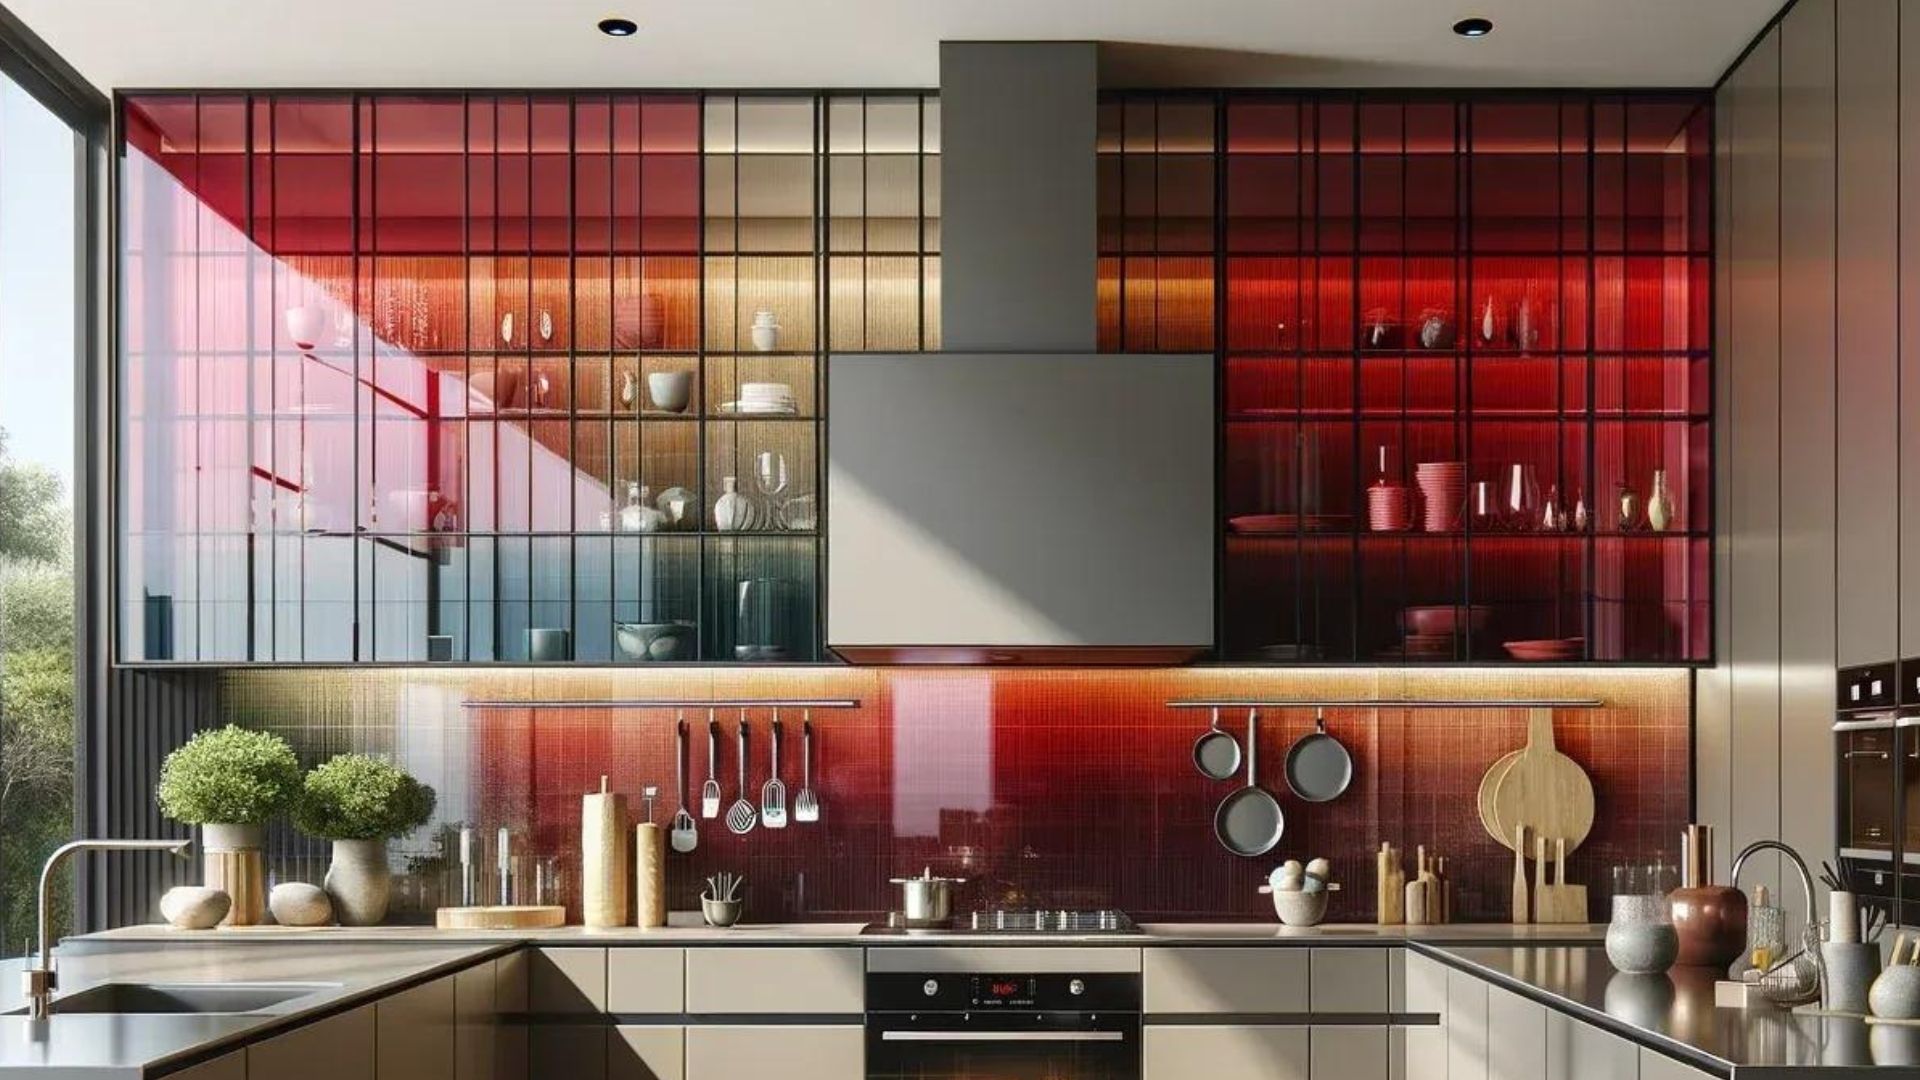 The glass splashback is one of the home's unsung heroes. Discover some exciting design options today